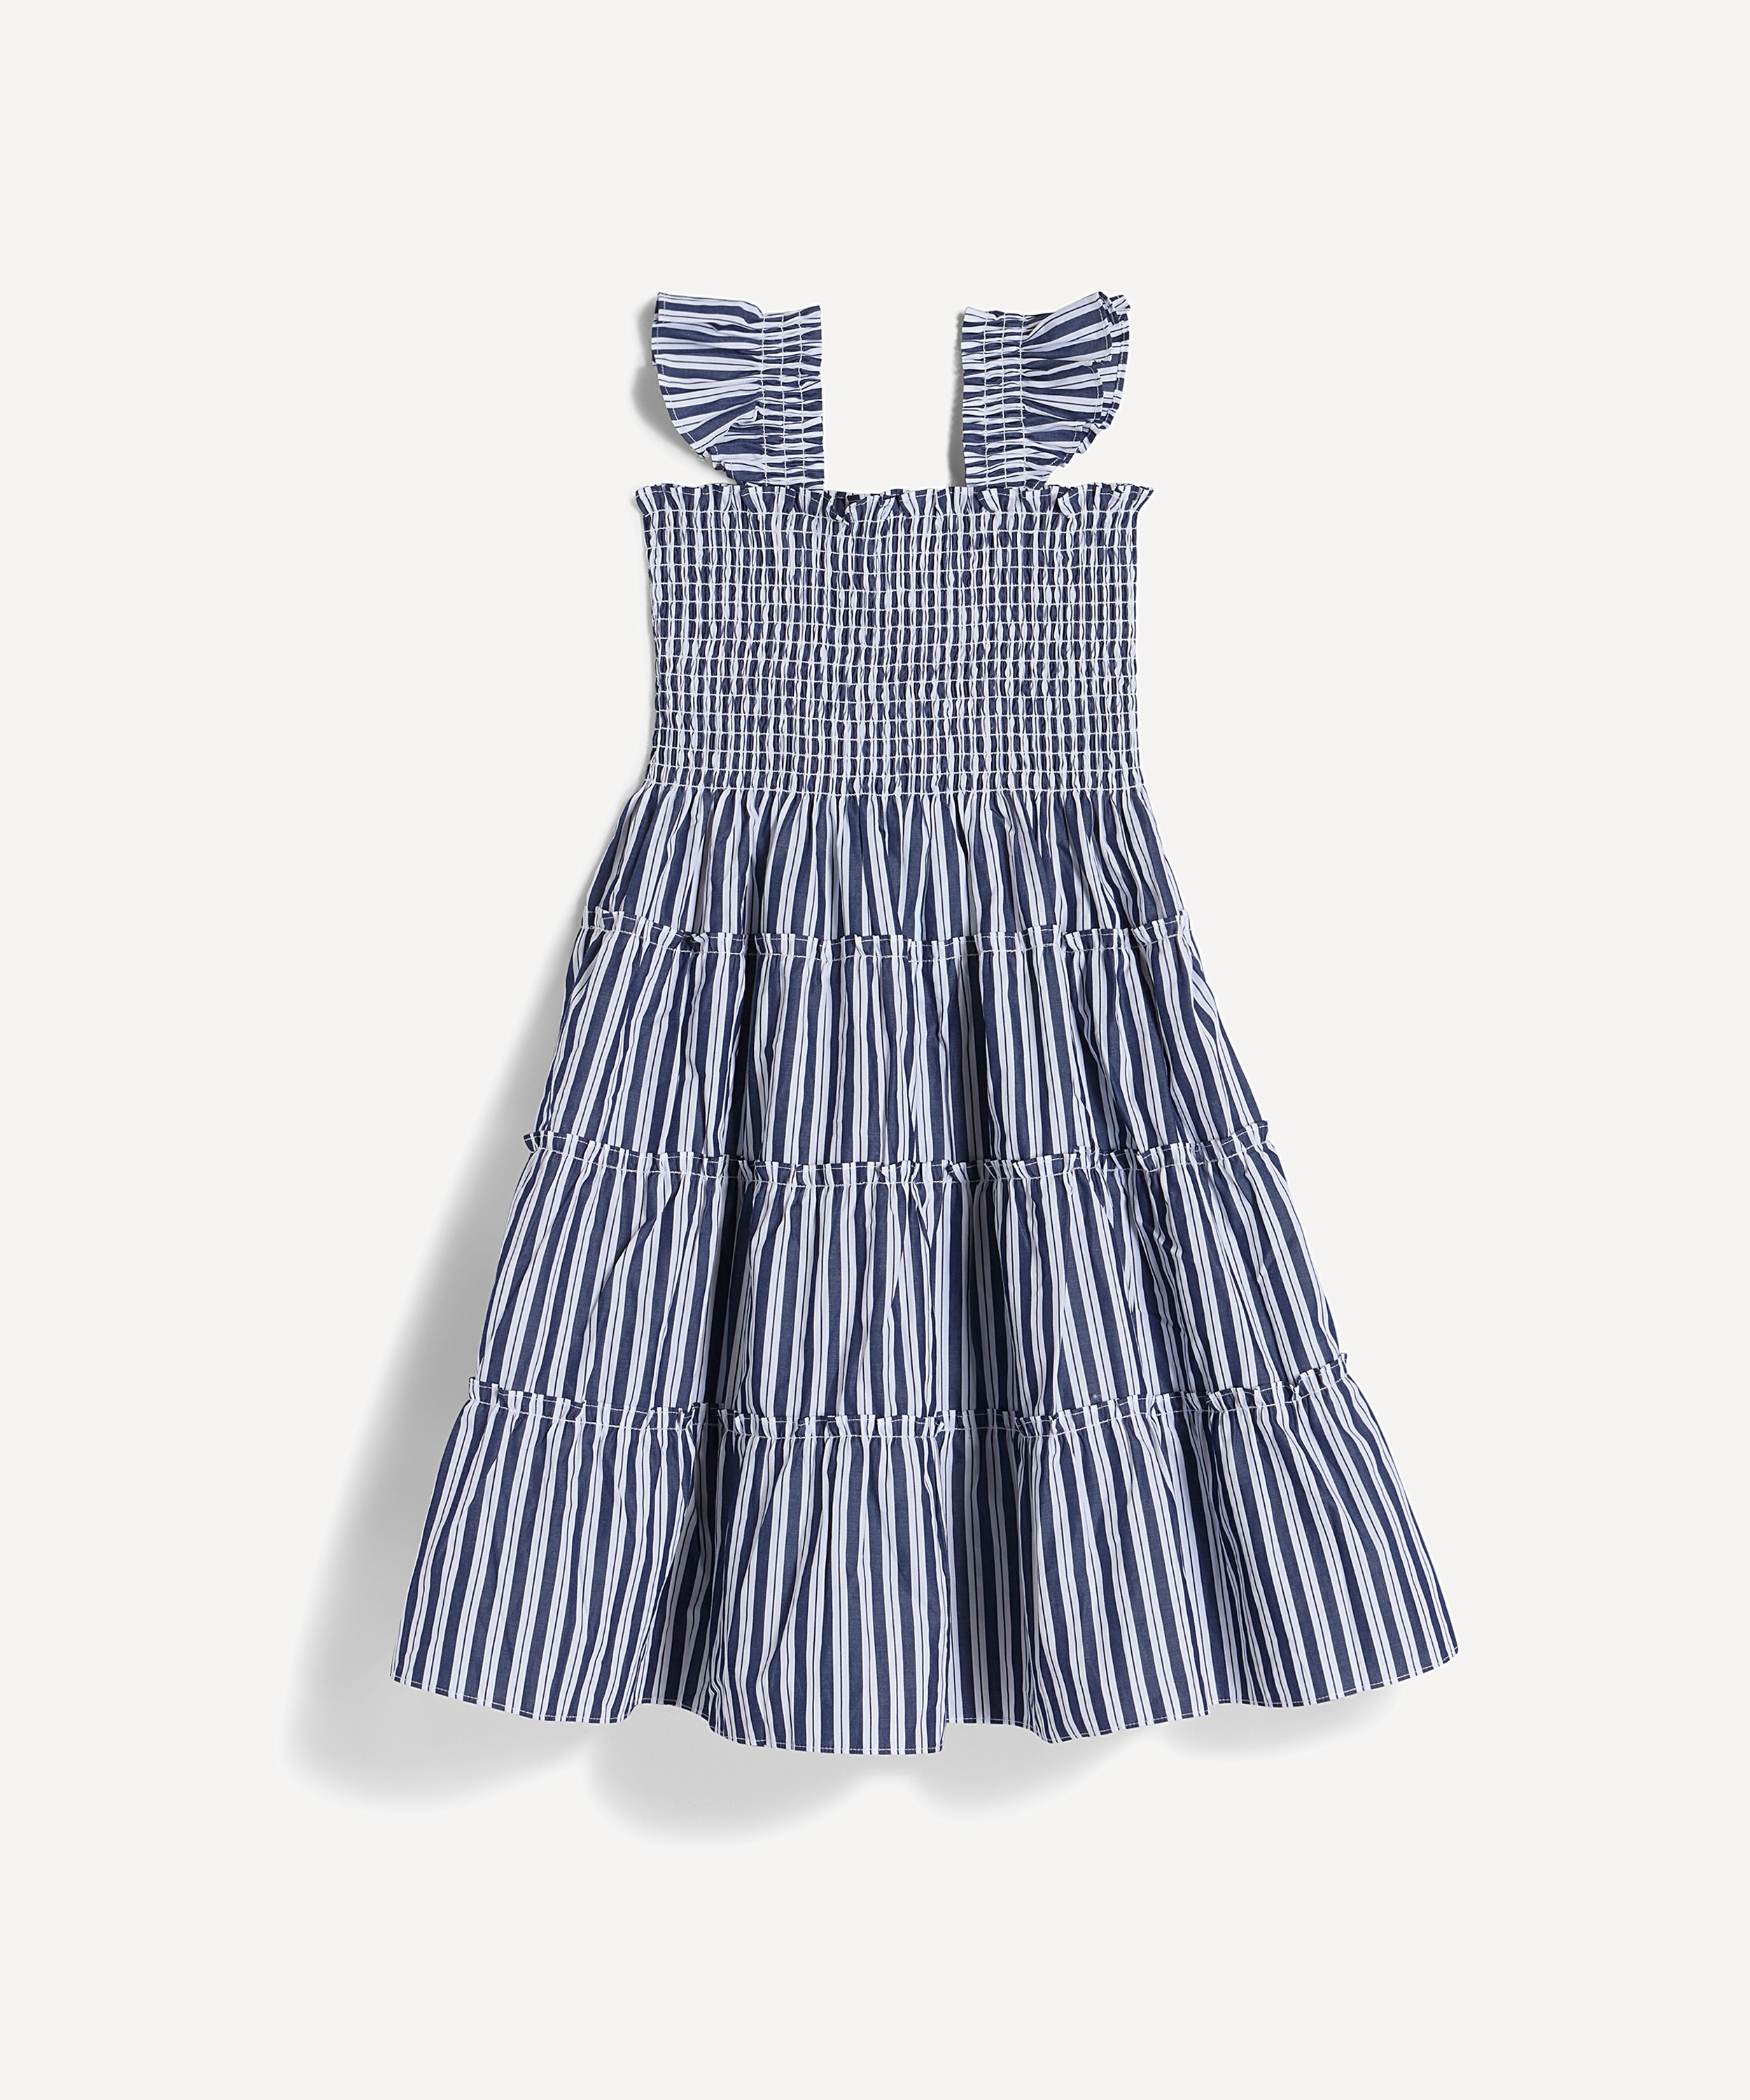 Hill House Home - Baby Ellie Nap Dress in Navy Stripe